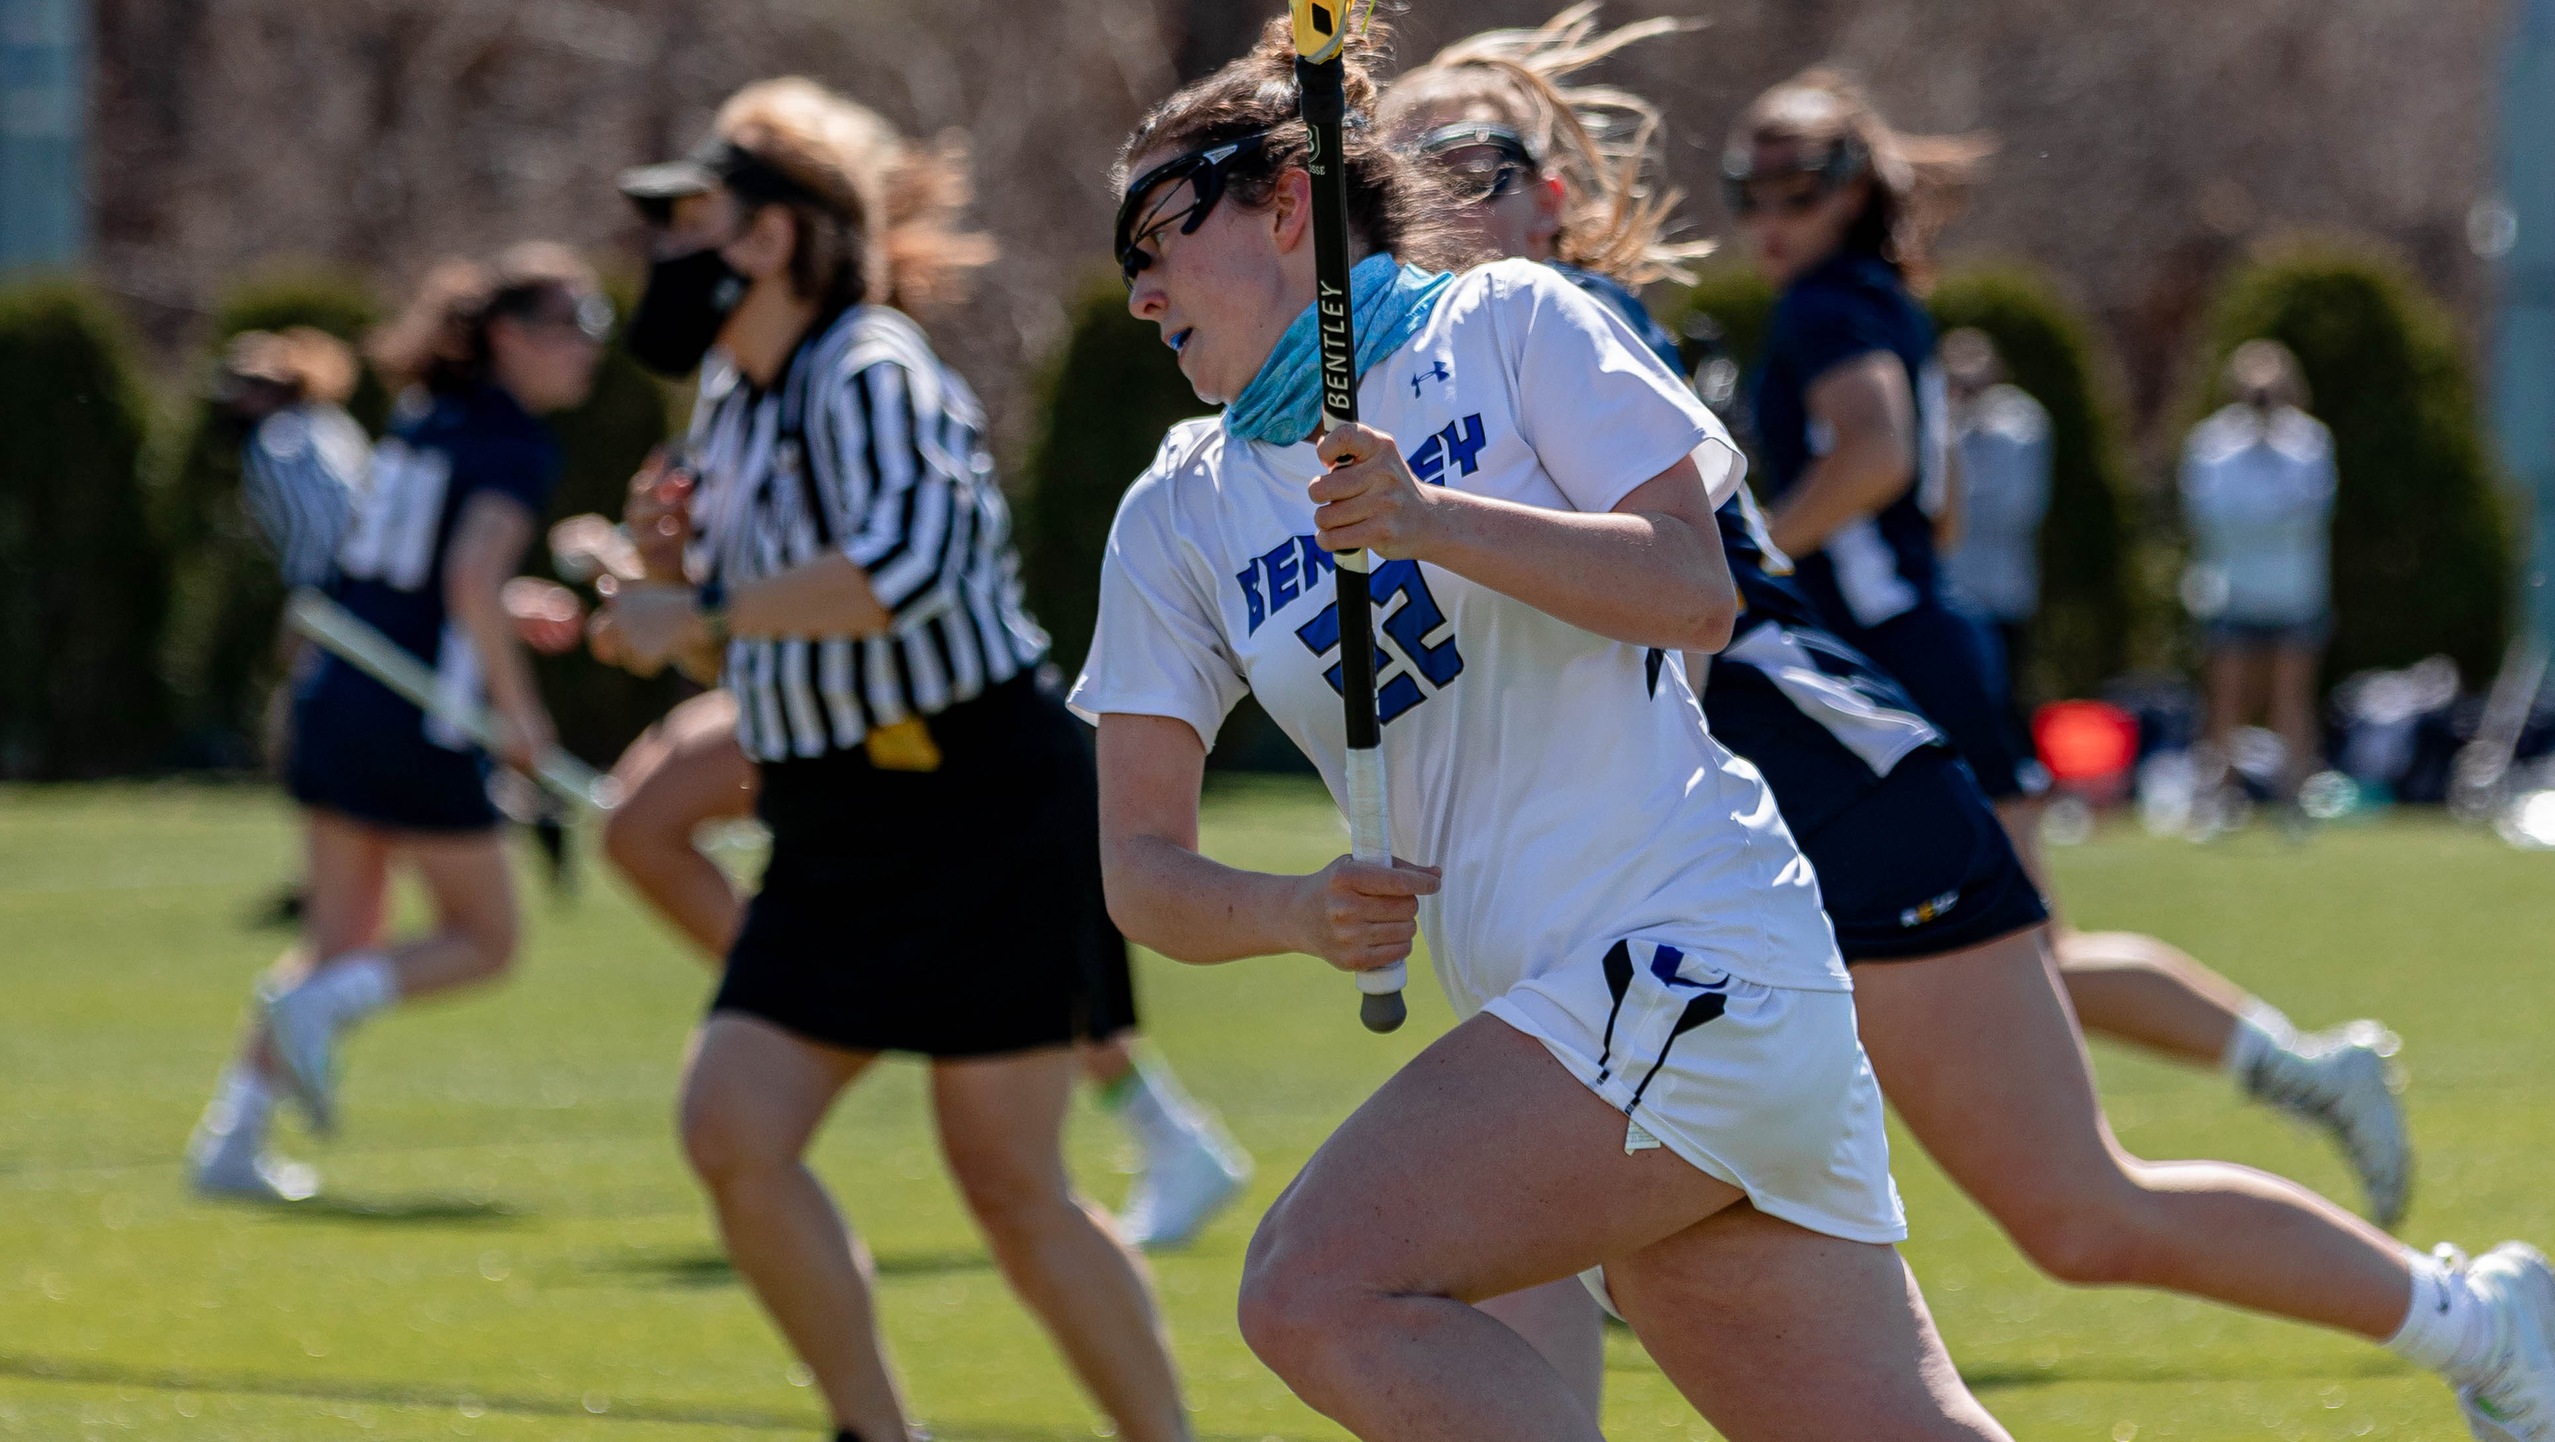 No. 14 Bentley Improves to 2-0 With 18-10 Win over Molloy